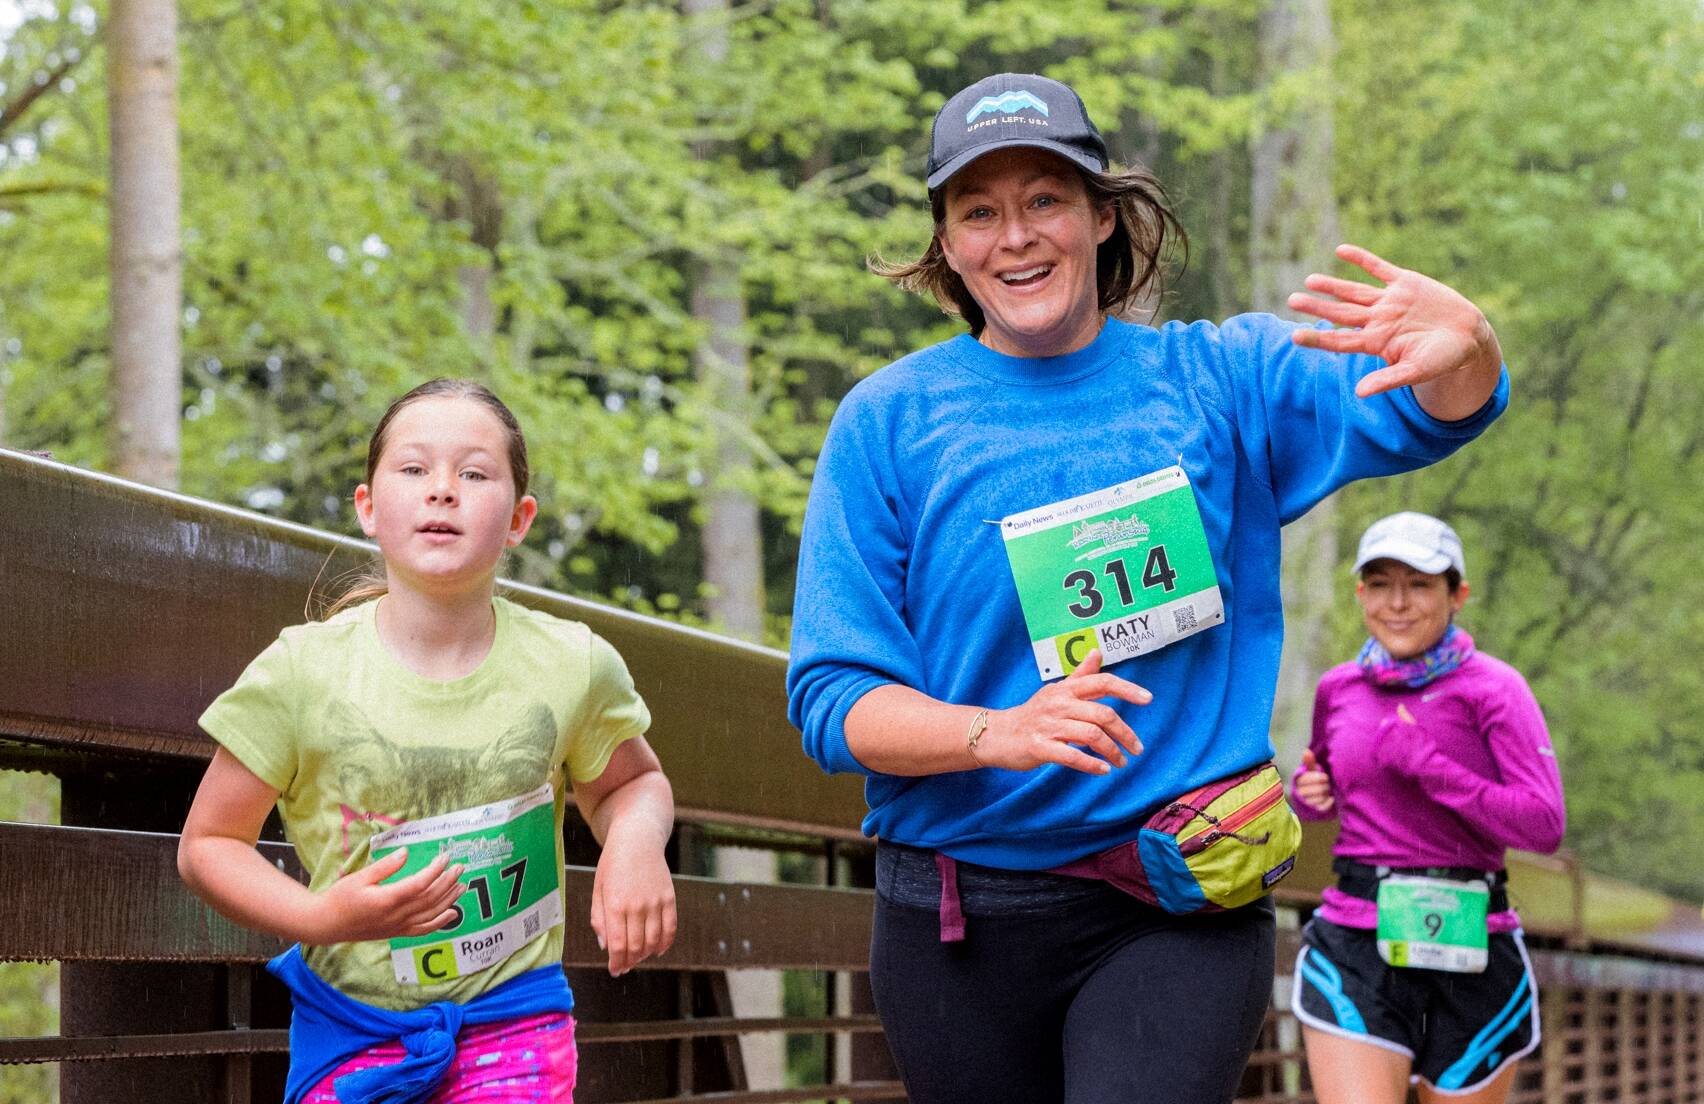 Participants enjoy the 2021 Railroad Bridge Run. More than 350 competitors are expected for the event for this year’s event, set for April 23. Photo courtesy of Run the Peninsula